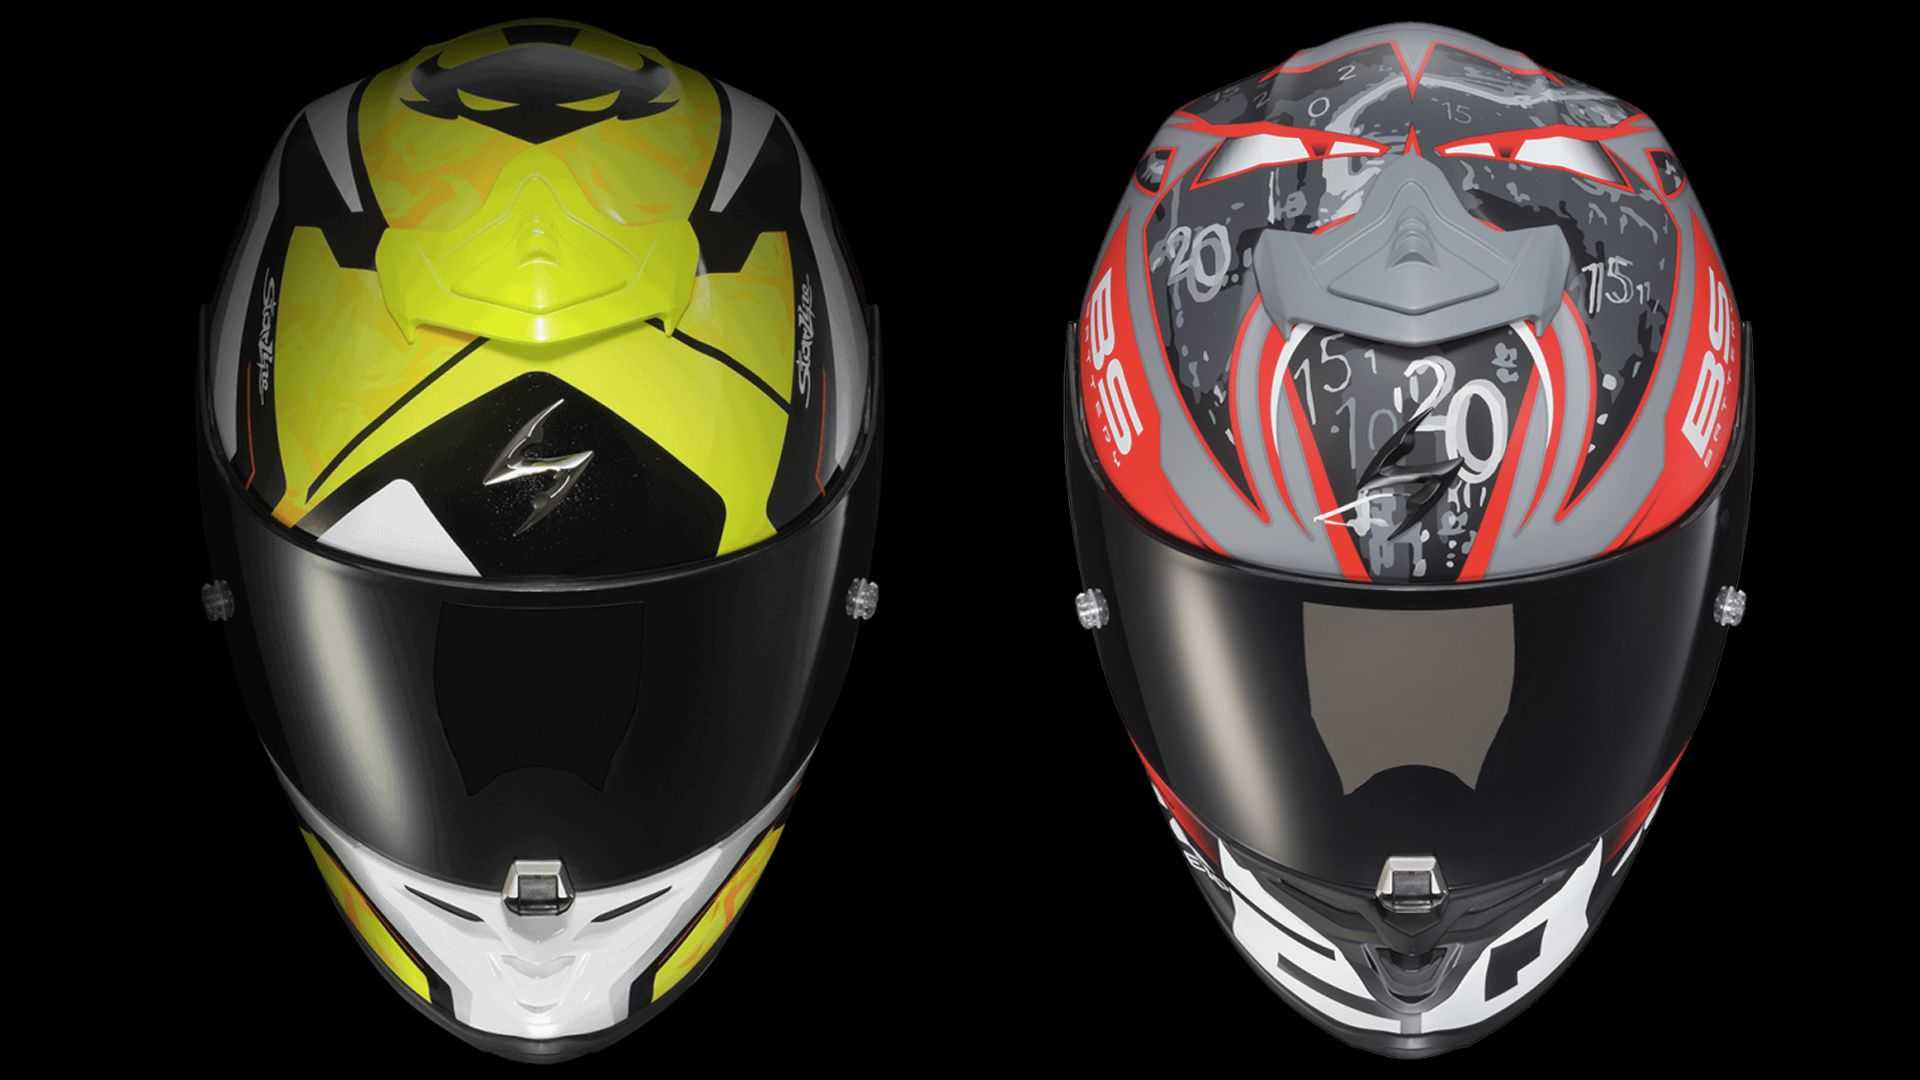 Scorpion launches new EXO-R1 Air
- also in the App MOTORCYCLE NEWS